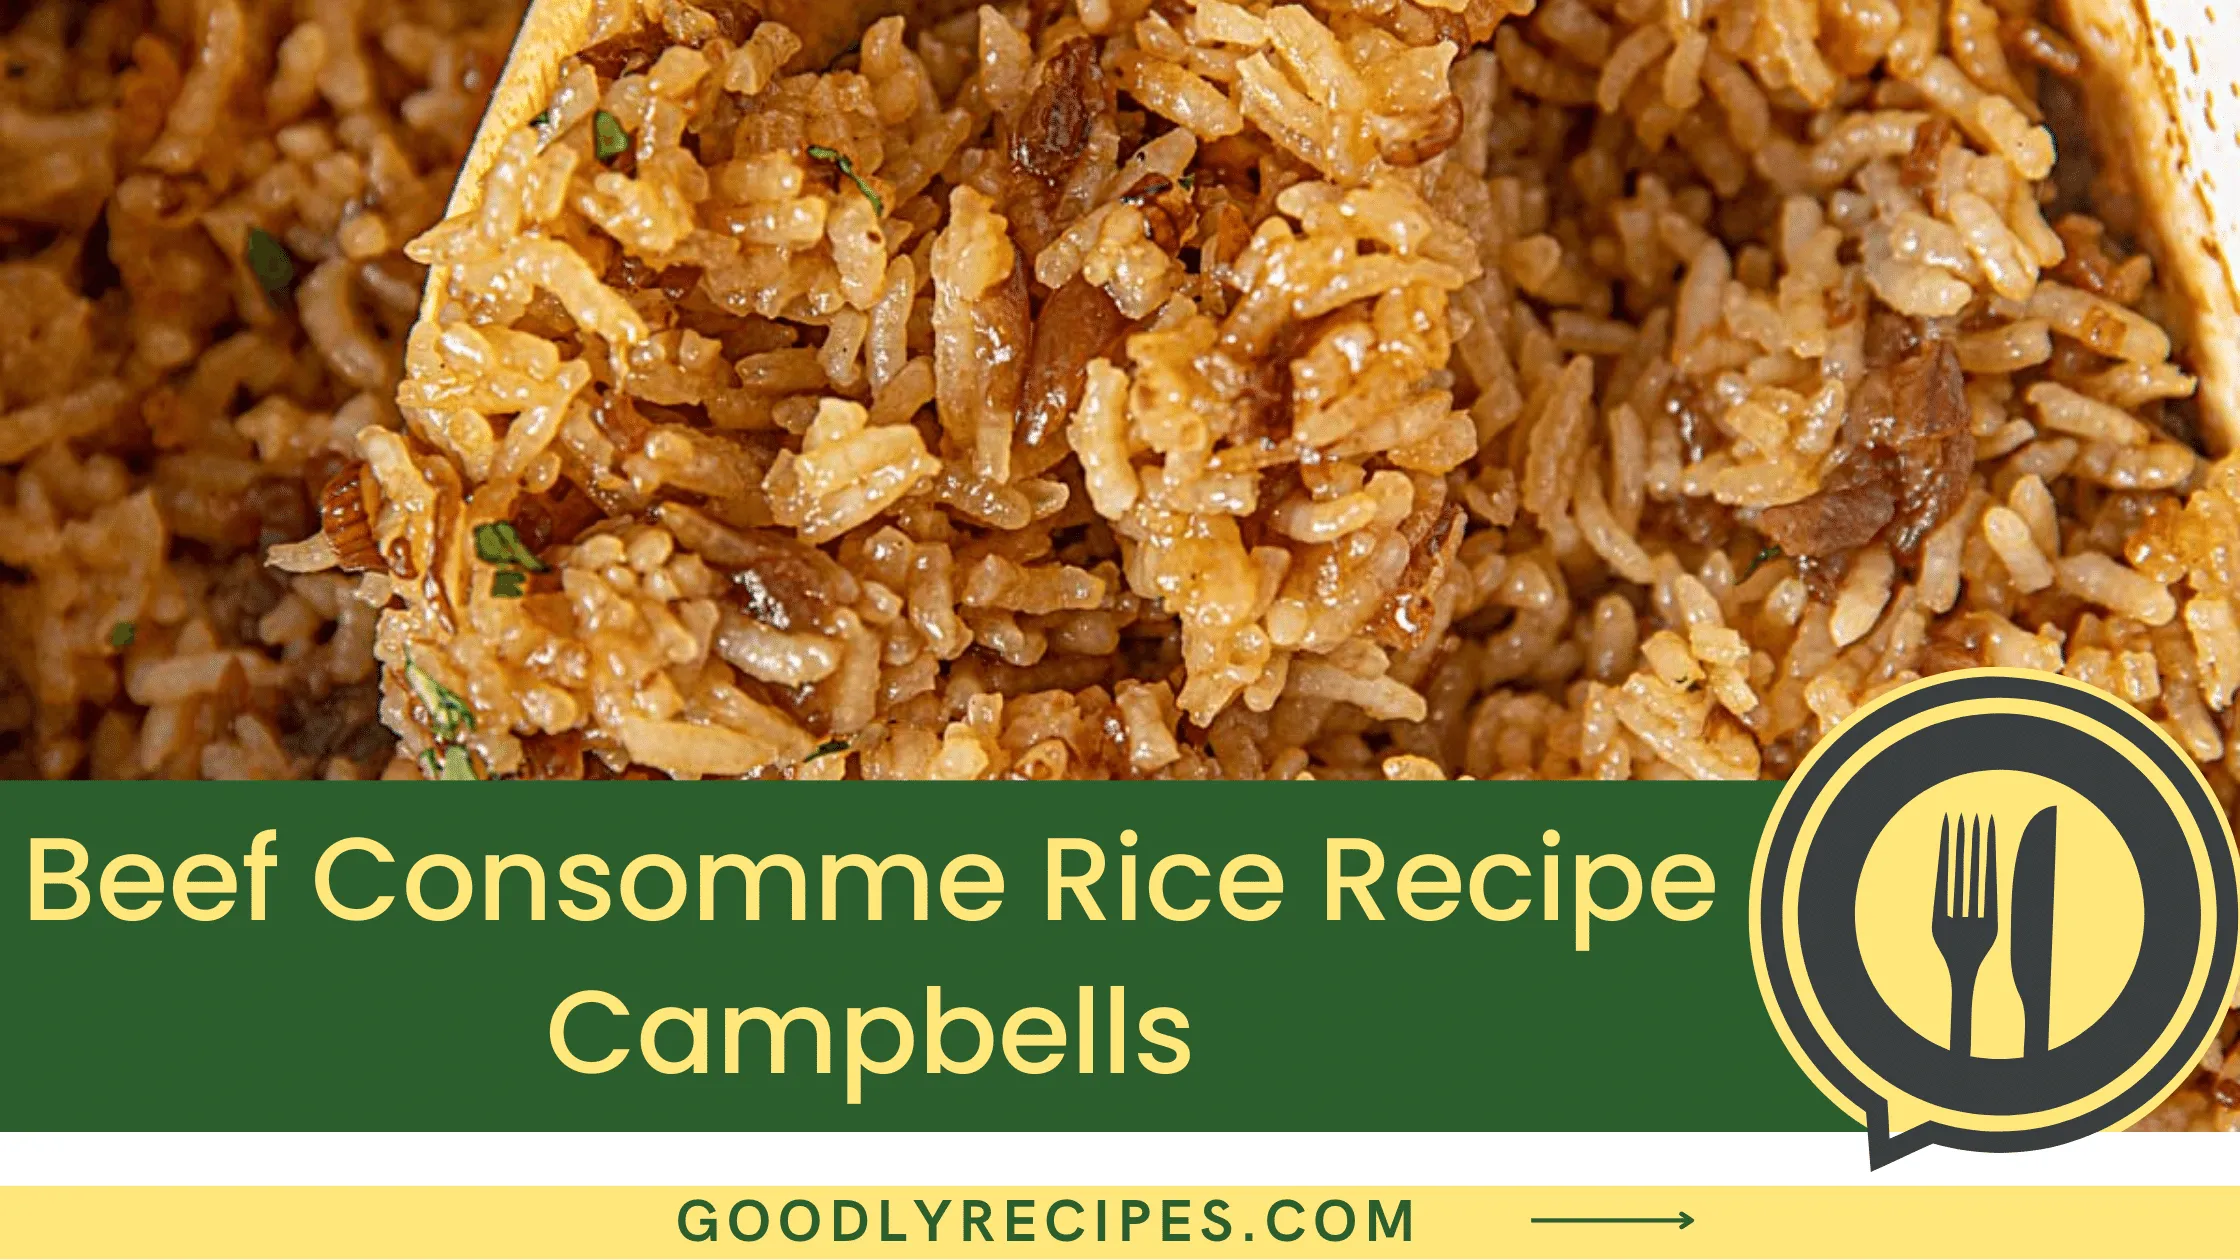 What Is Beef Consomme Rice Campbells?